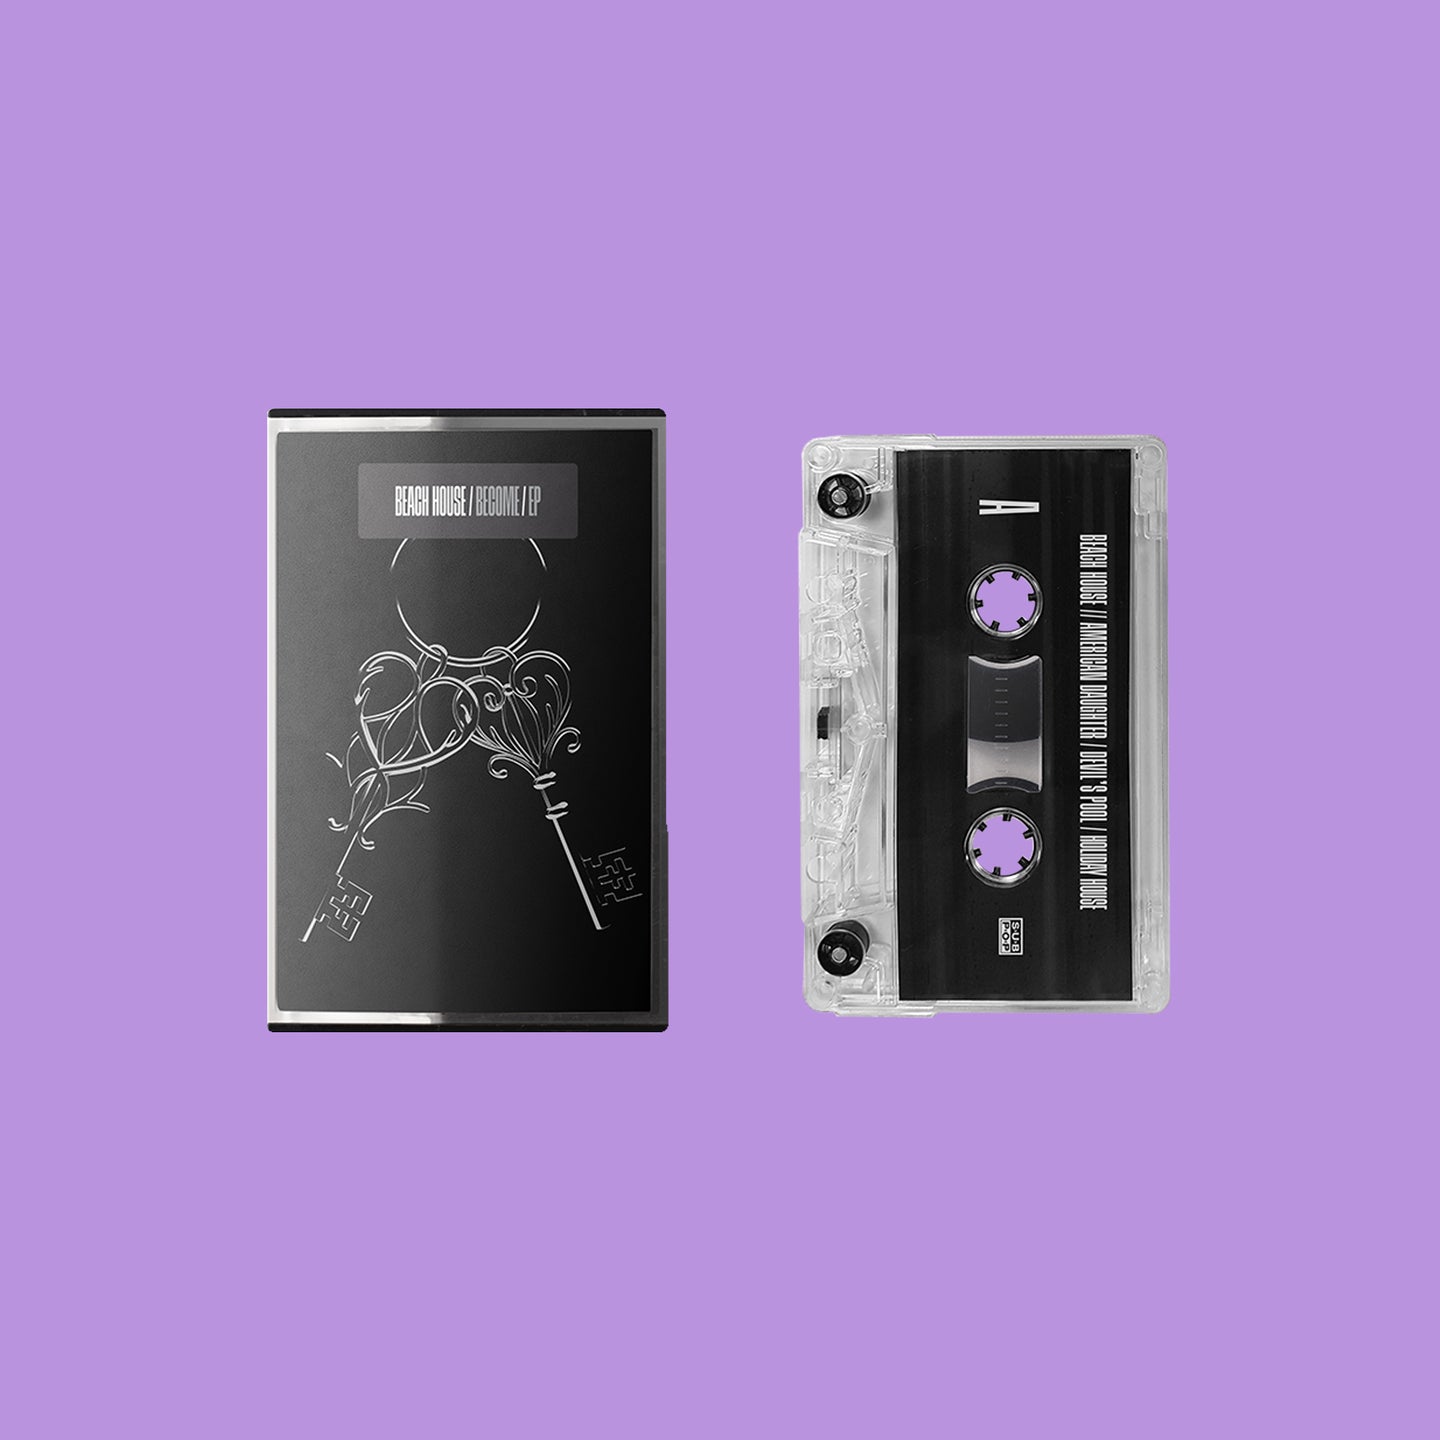 Become Cassette